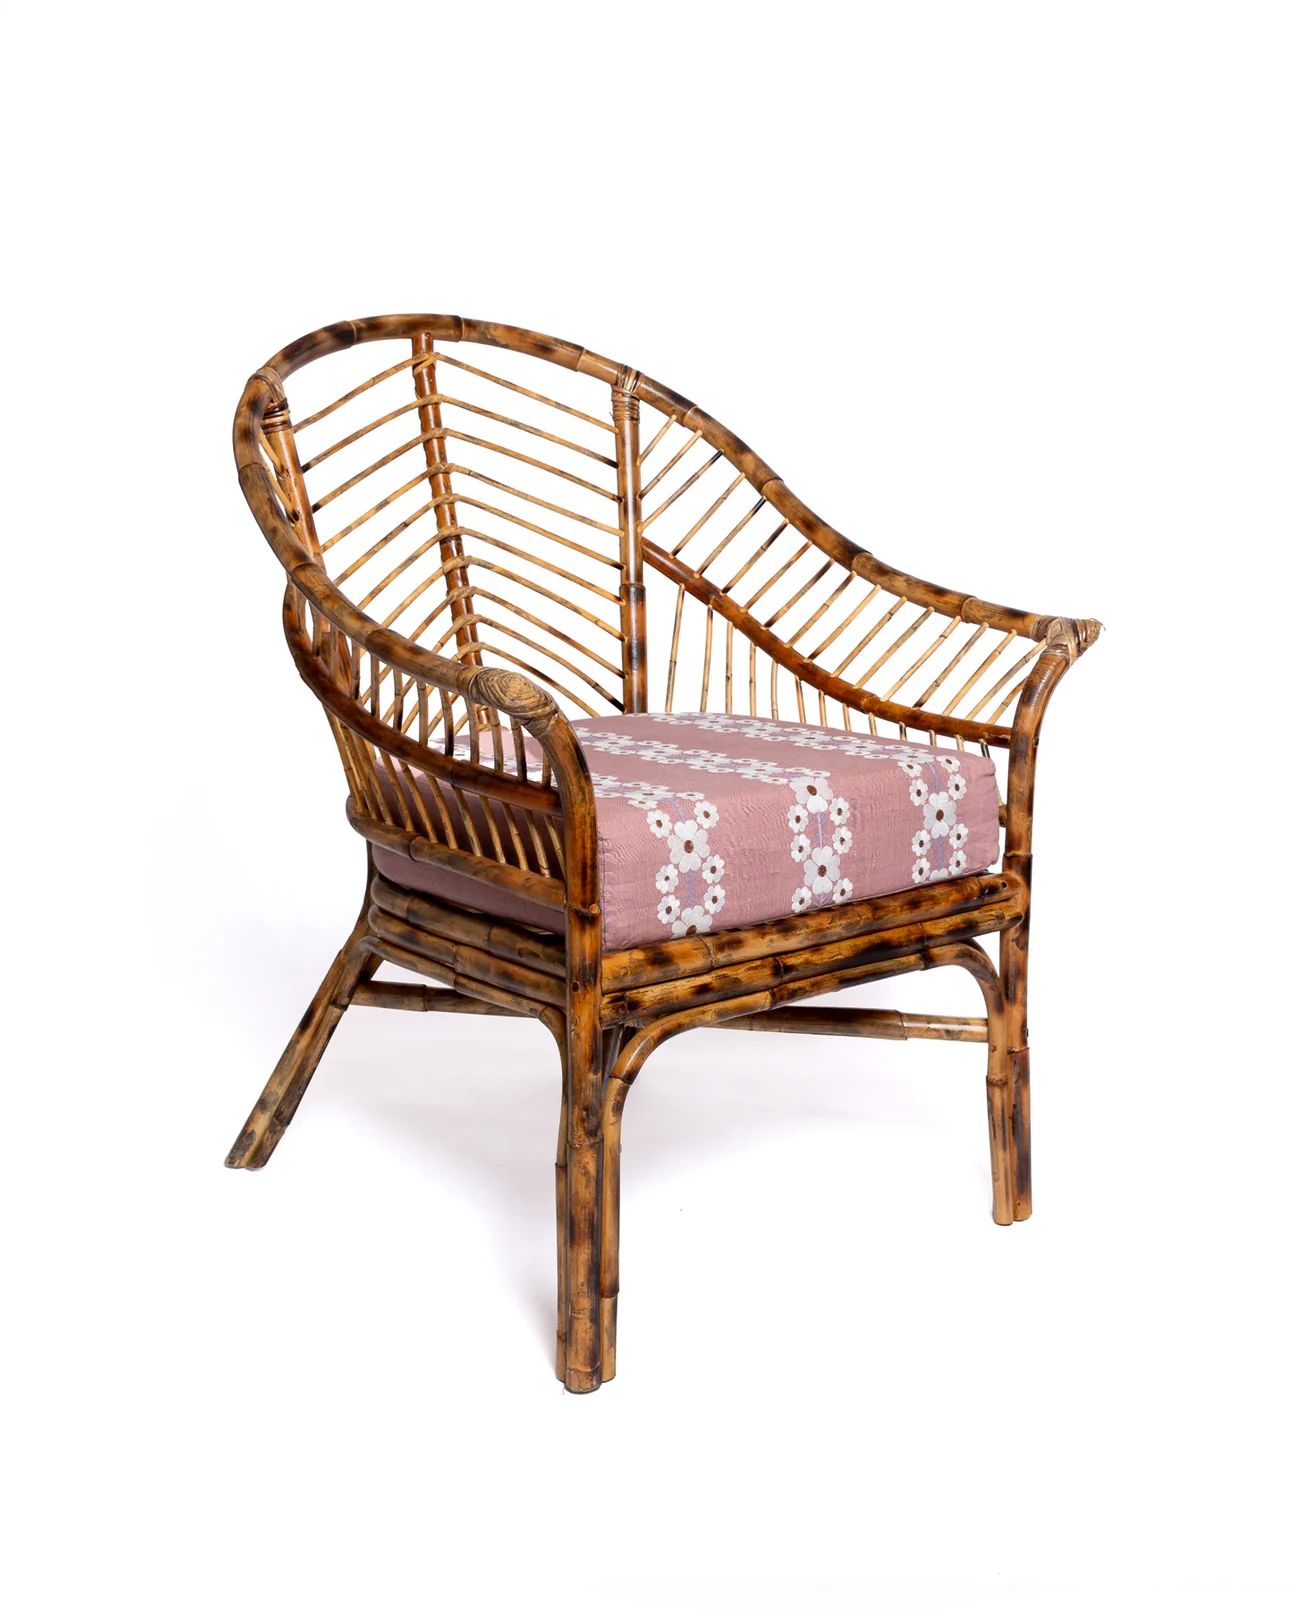 Piolo Bamboo chair | Sharland England by Louise Roe | Sharland England